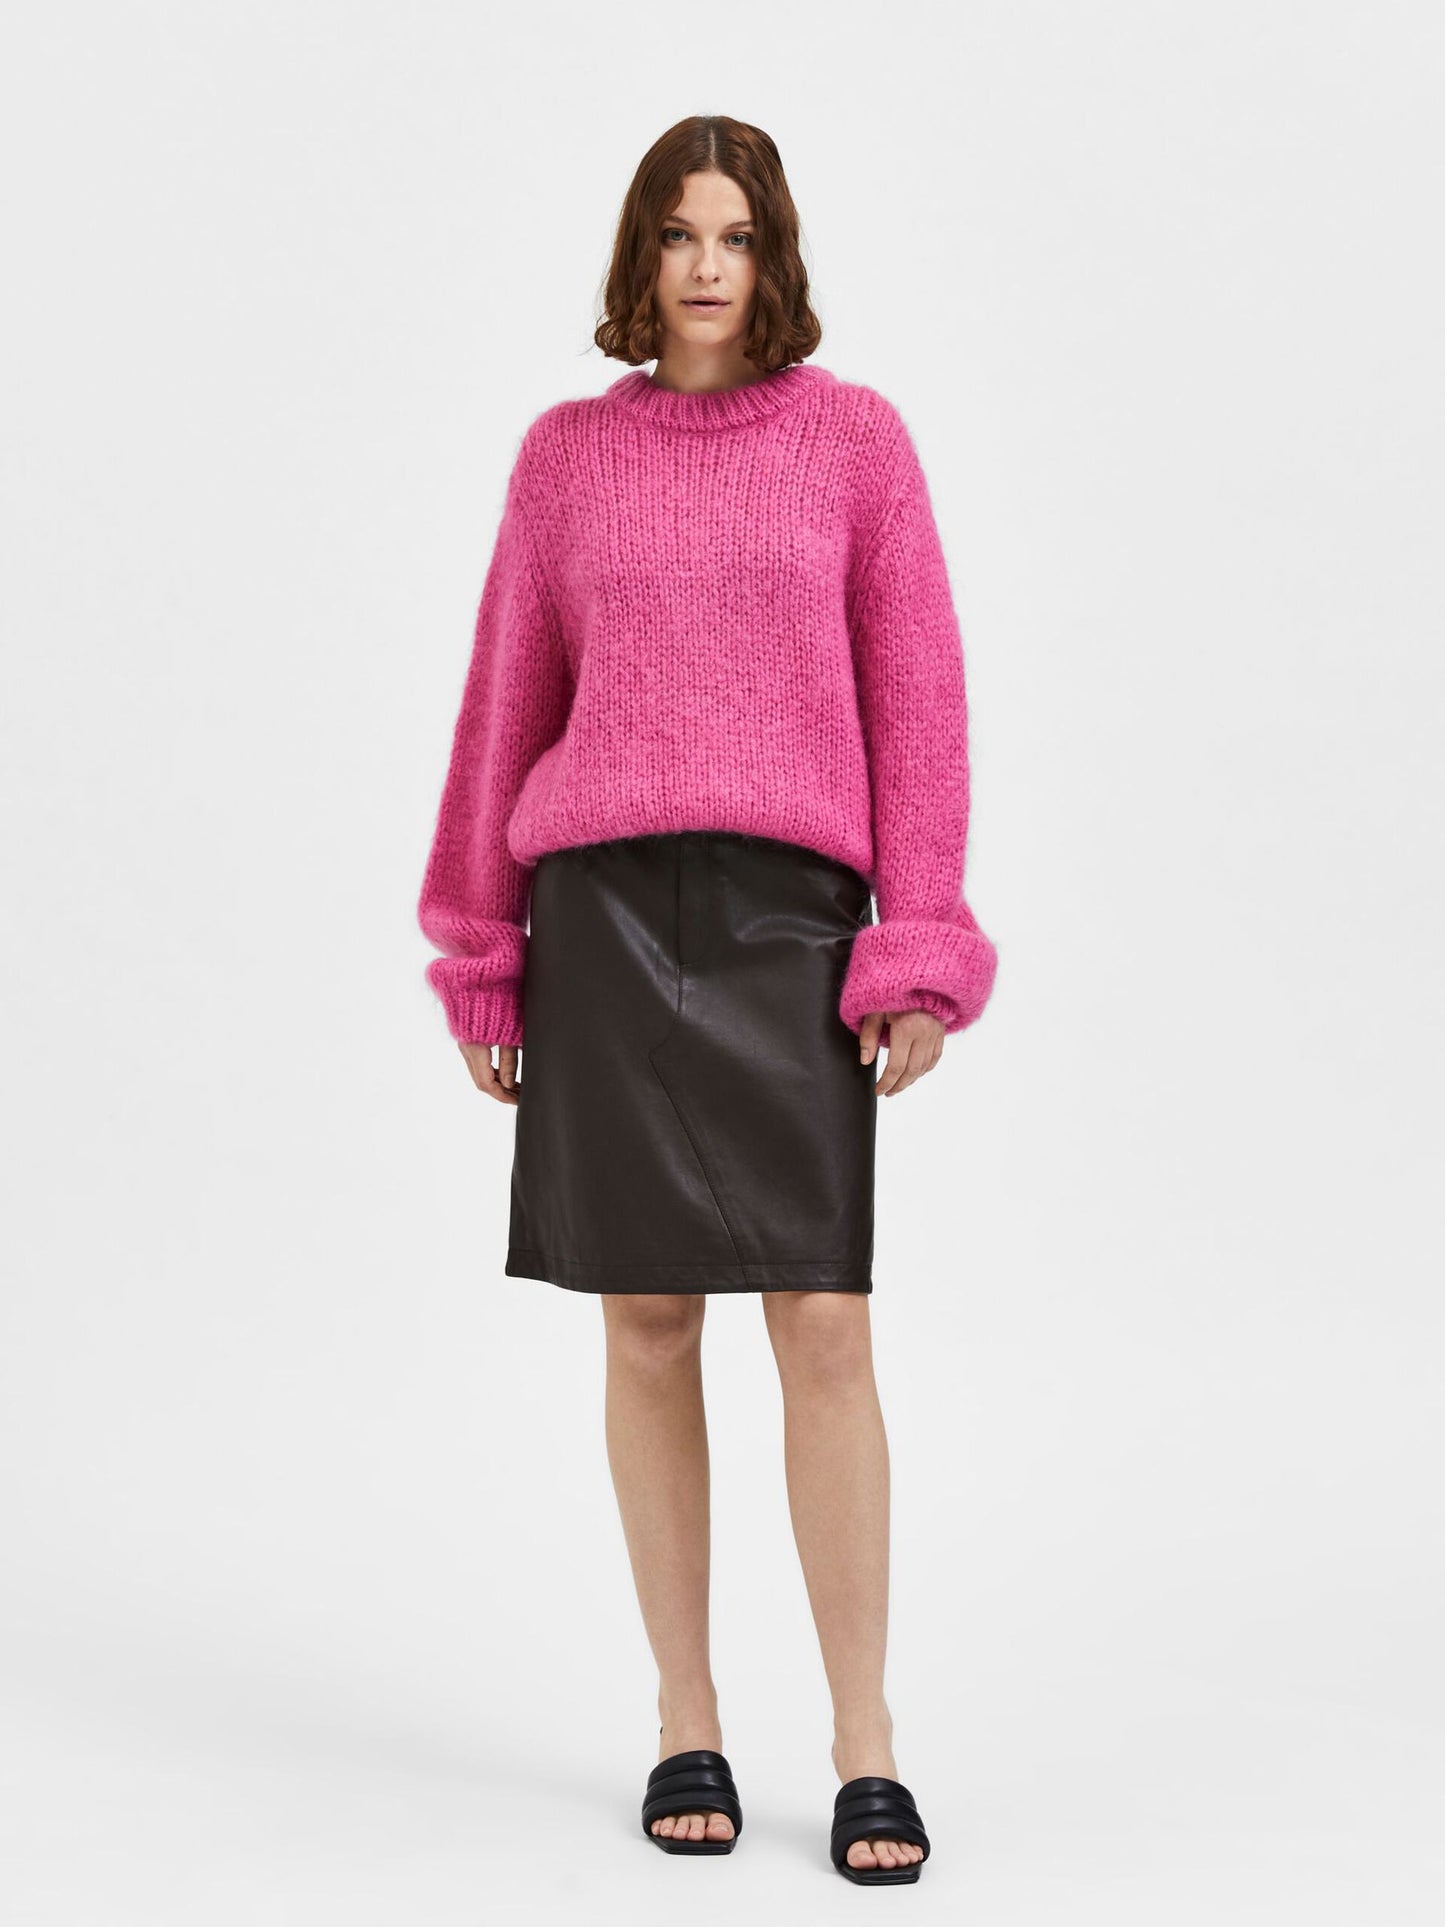 Mohair Blend Knitted Jumper - Selected – Styled By: Sarah Rickard